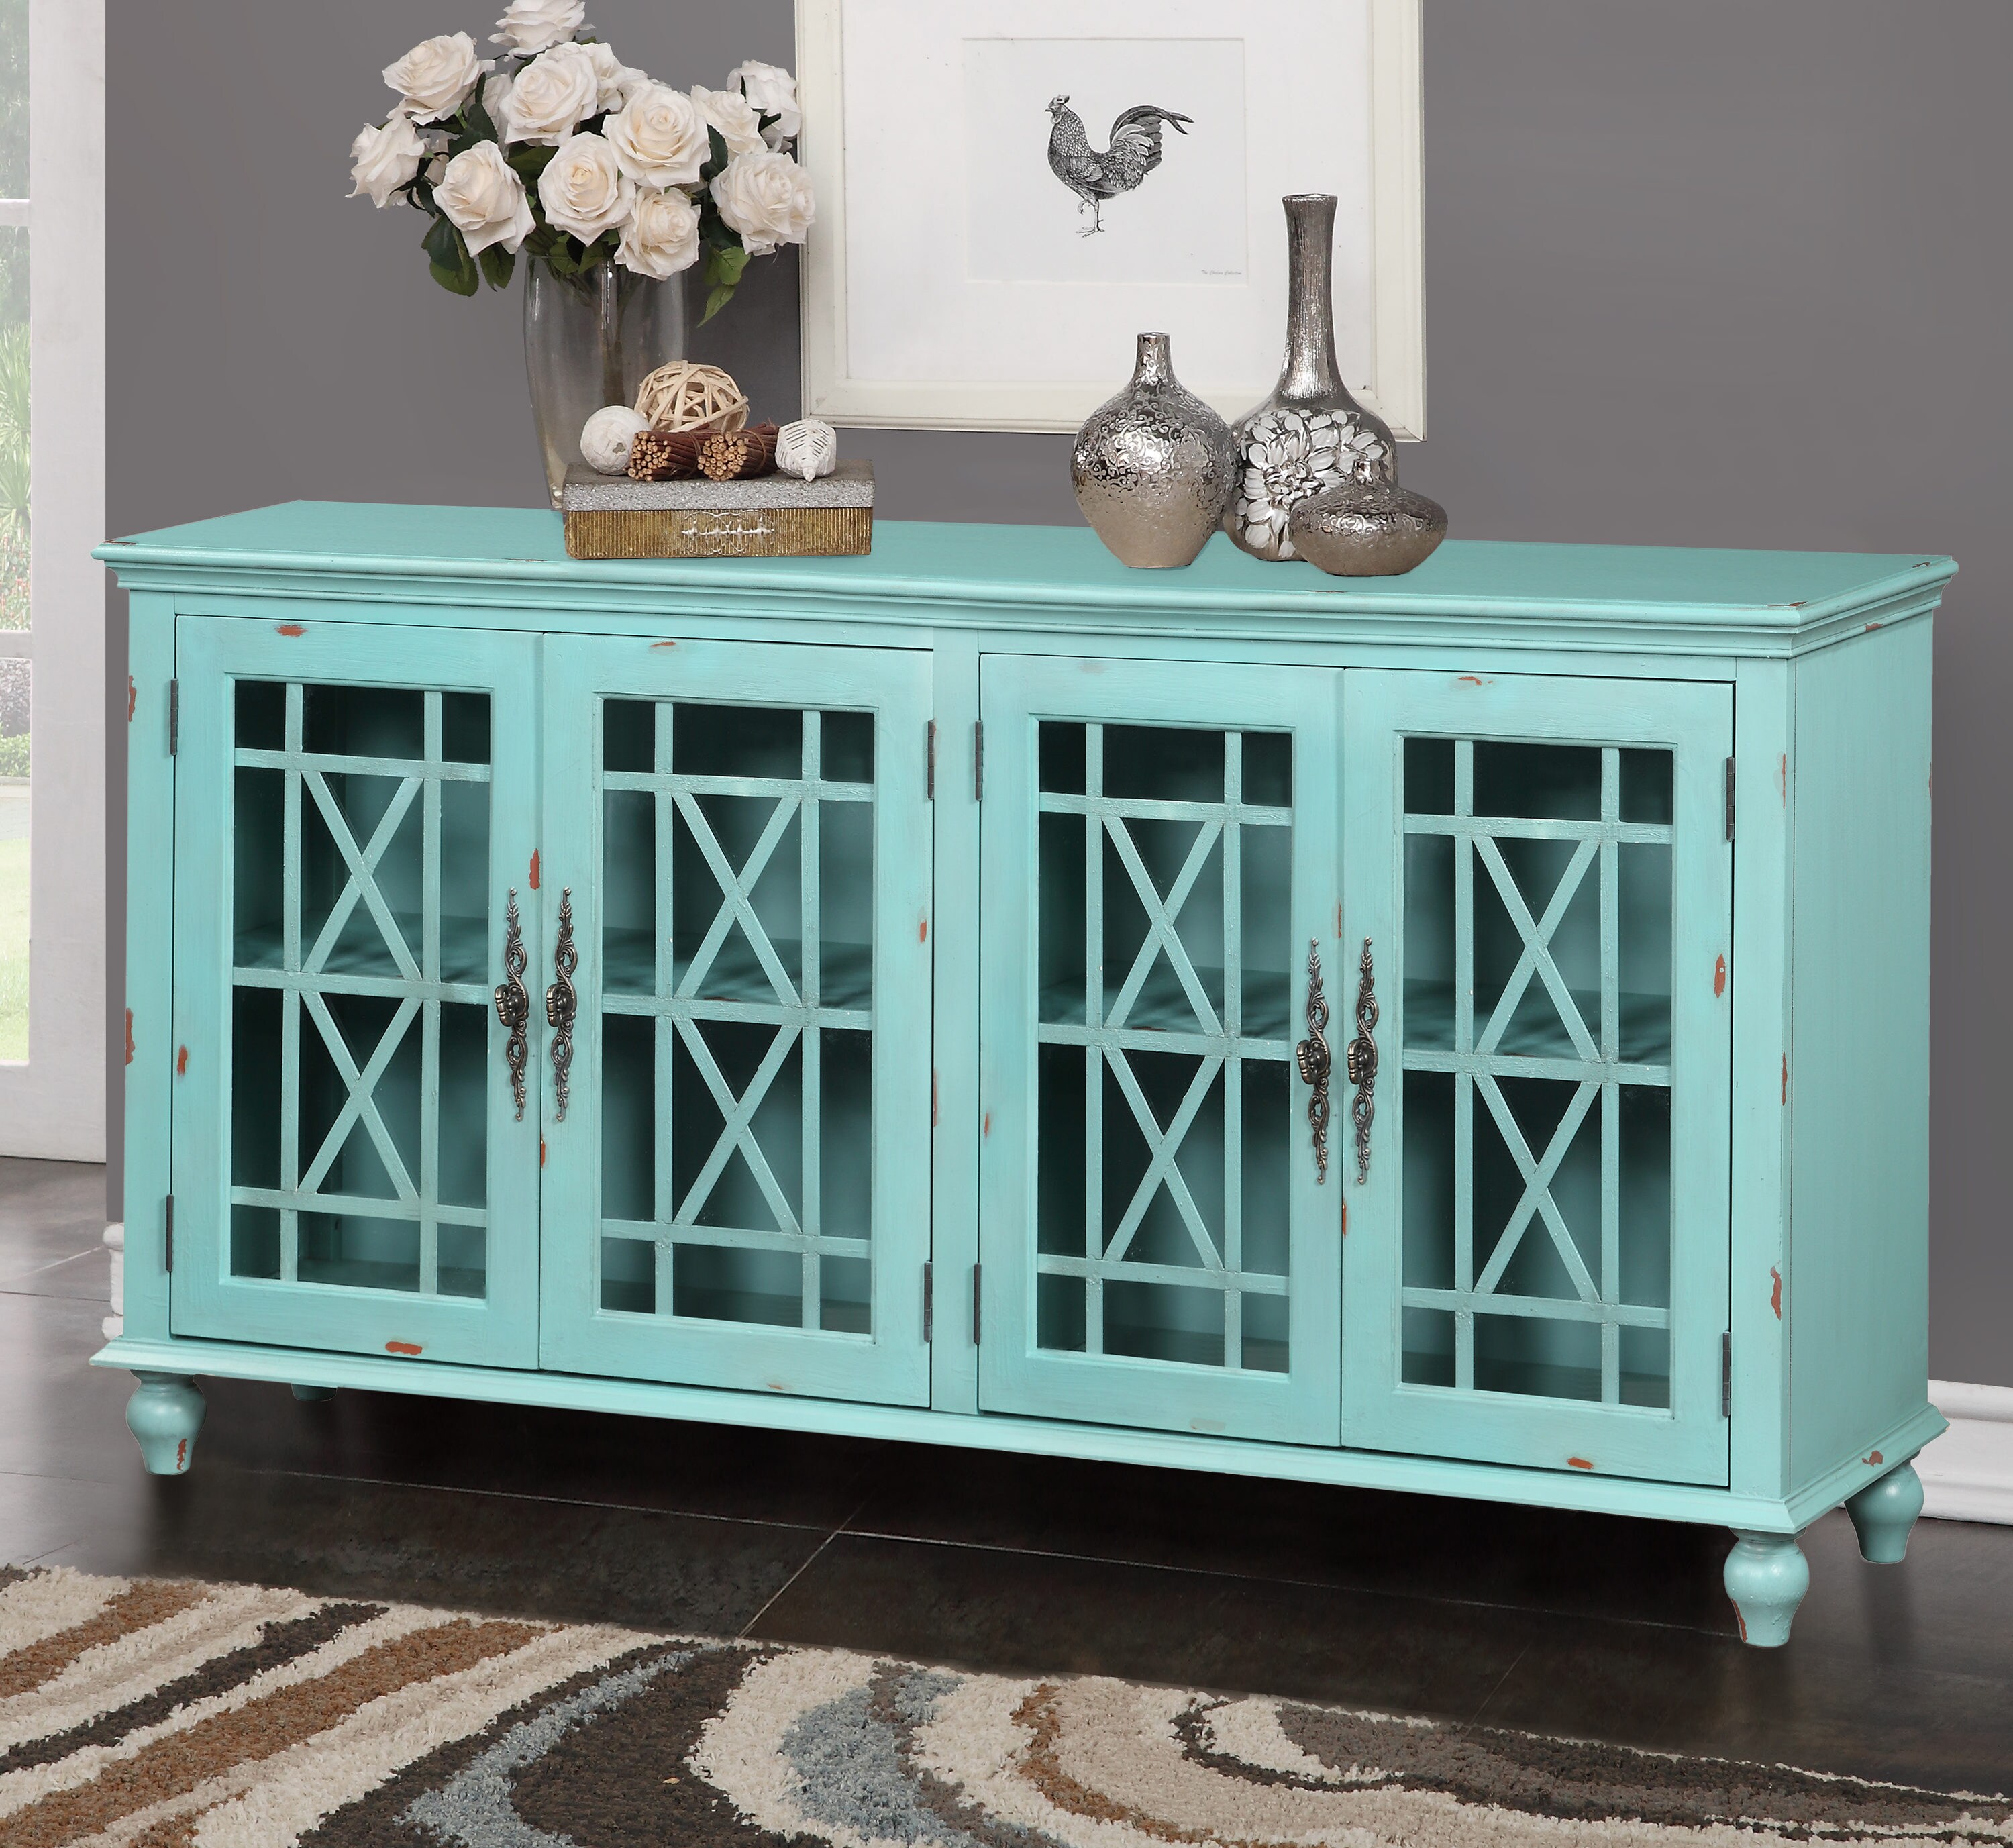 OSHOME Storage Accents Country Weathered Turquoise Console Table at ...